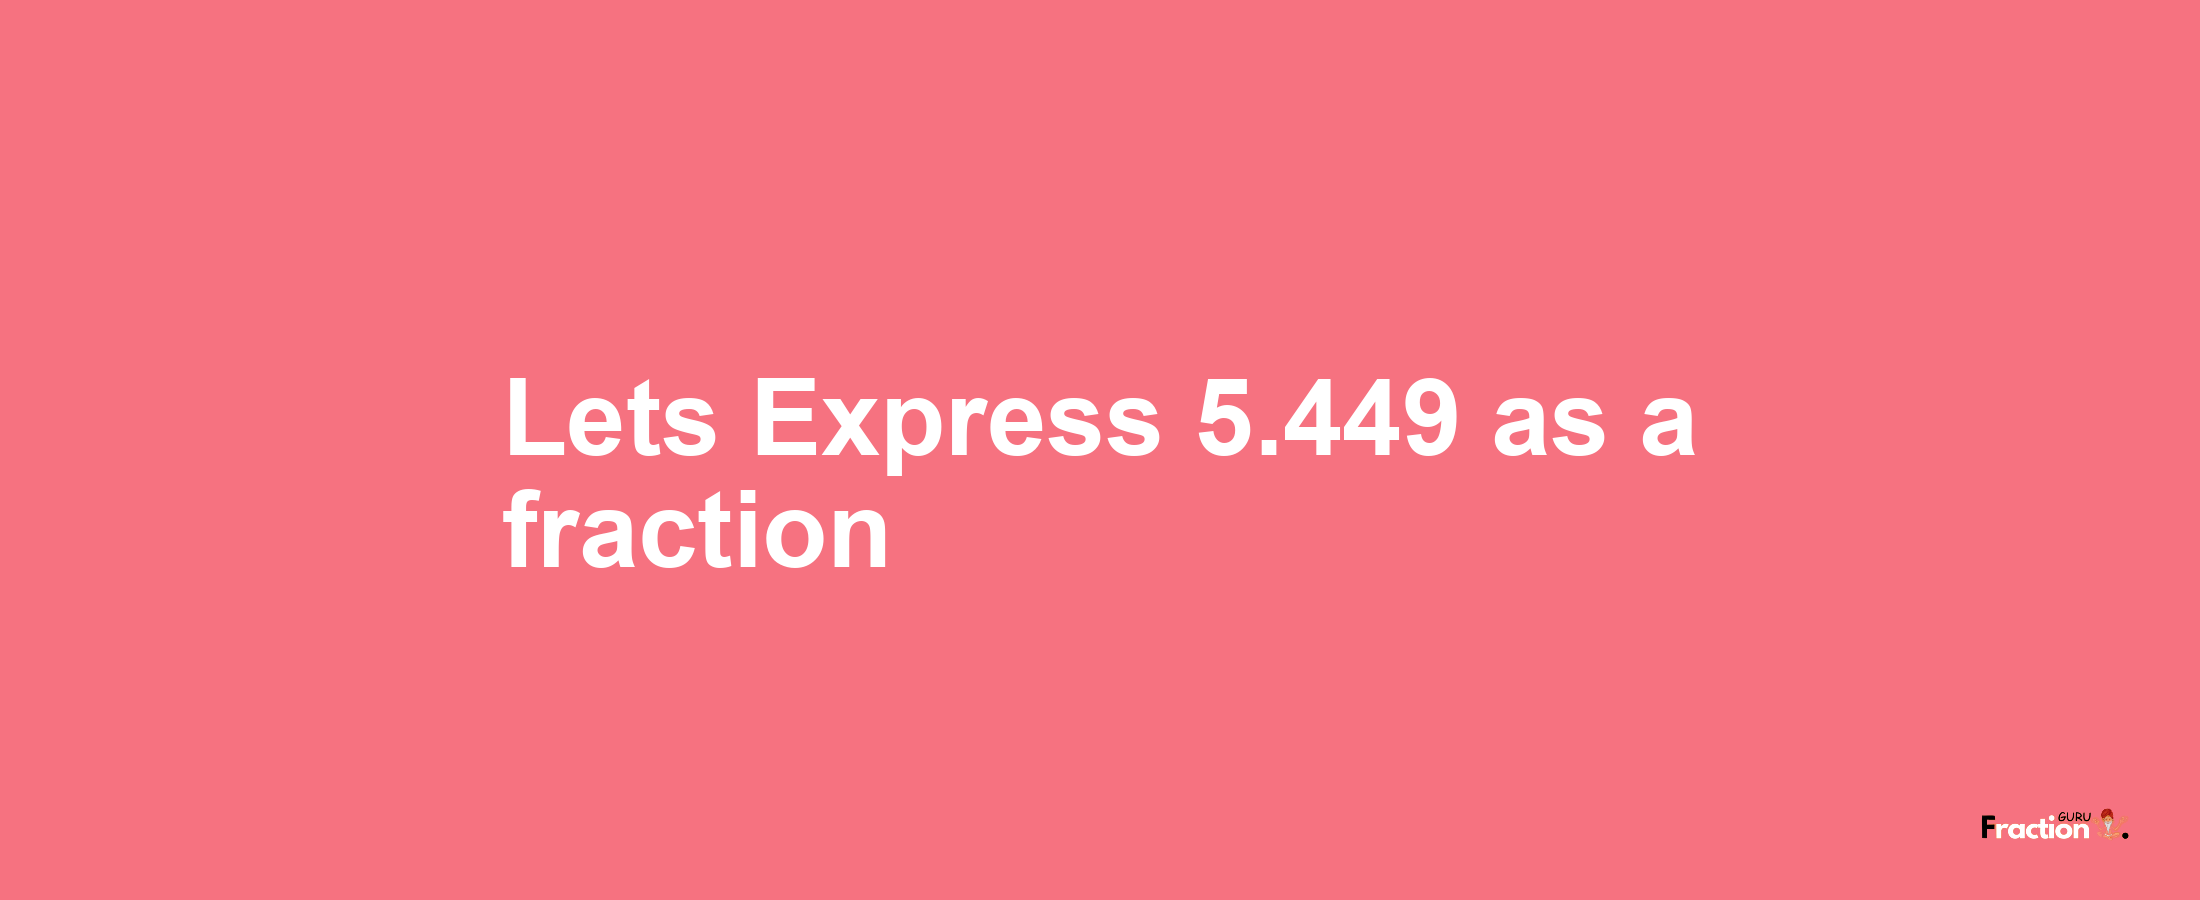 Lets Express 5.449 as afraction